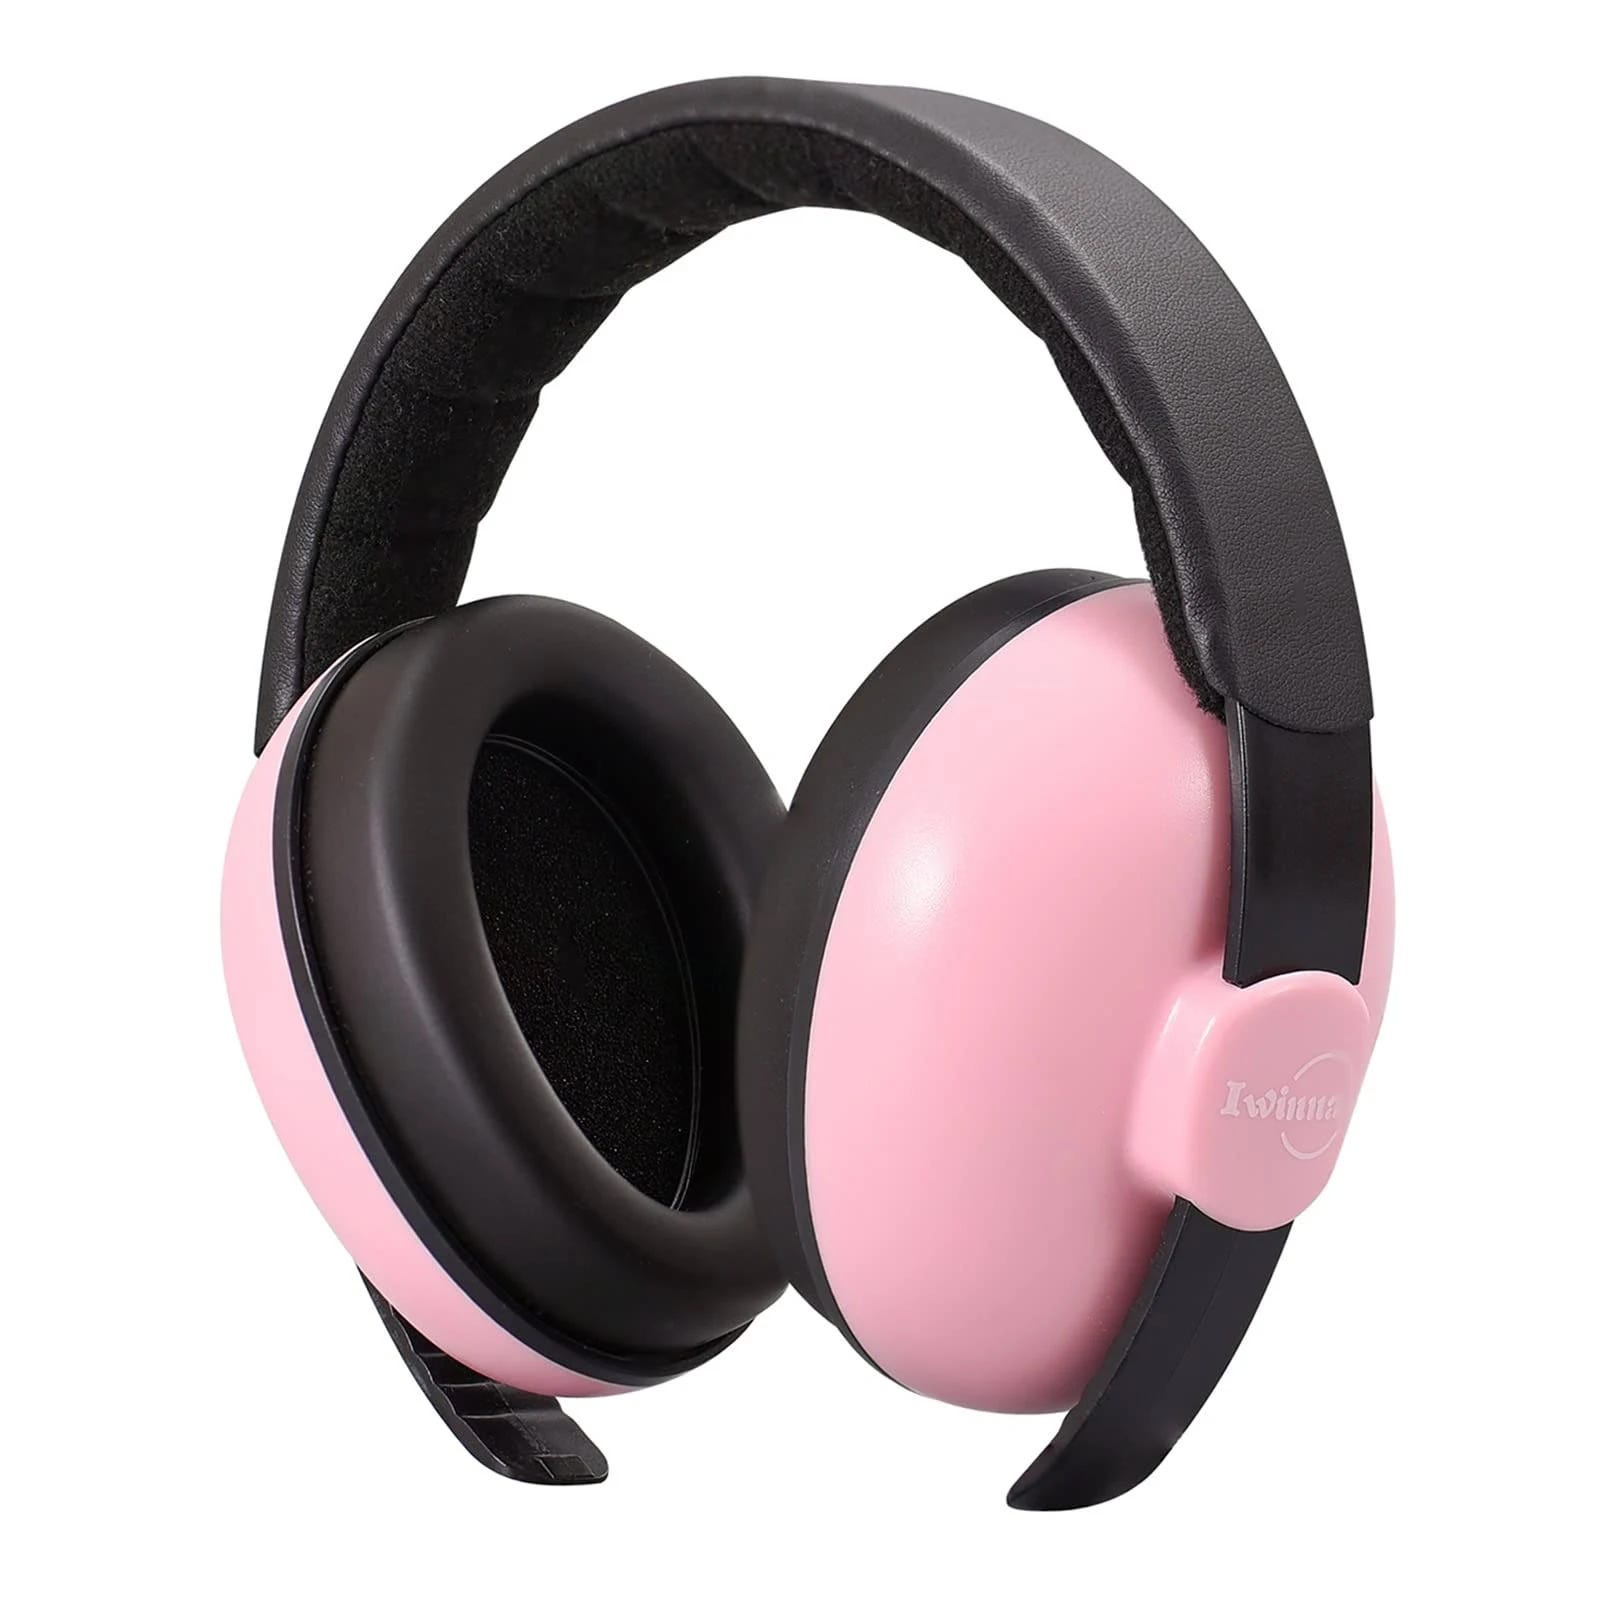 Noise Cancelling Baby Earmuffs for Newborn-2-Year-Olds | Image